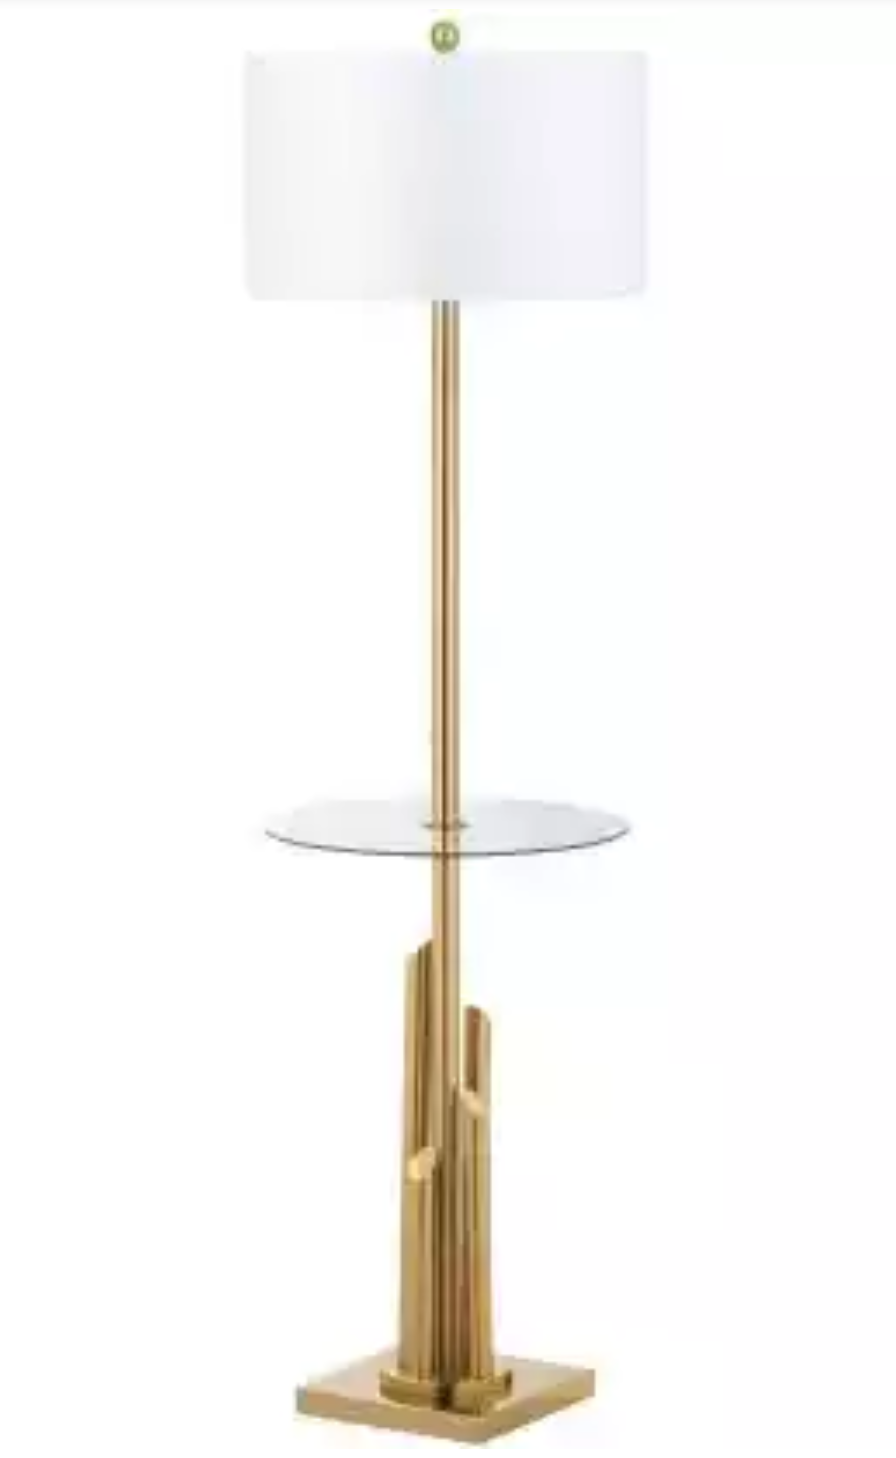 15 Floor Lamps With Table Attached The, Floor Lamp With Table Attached Australia